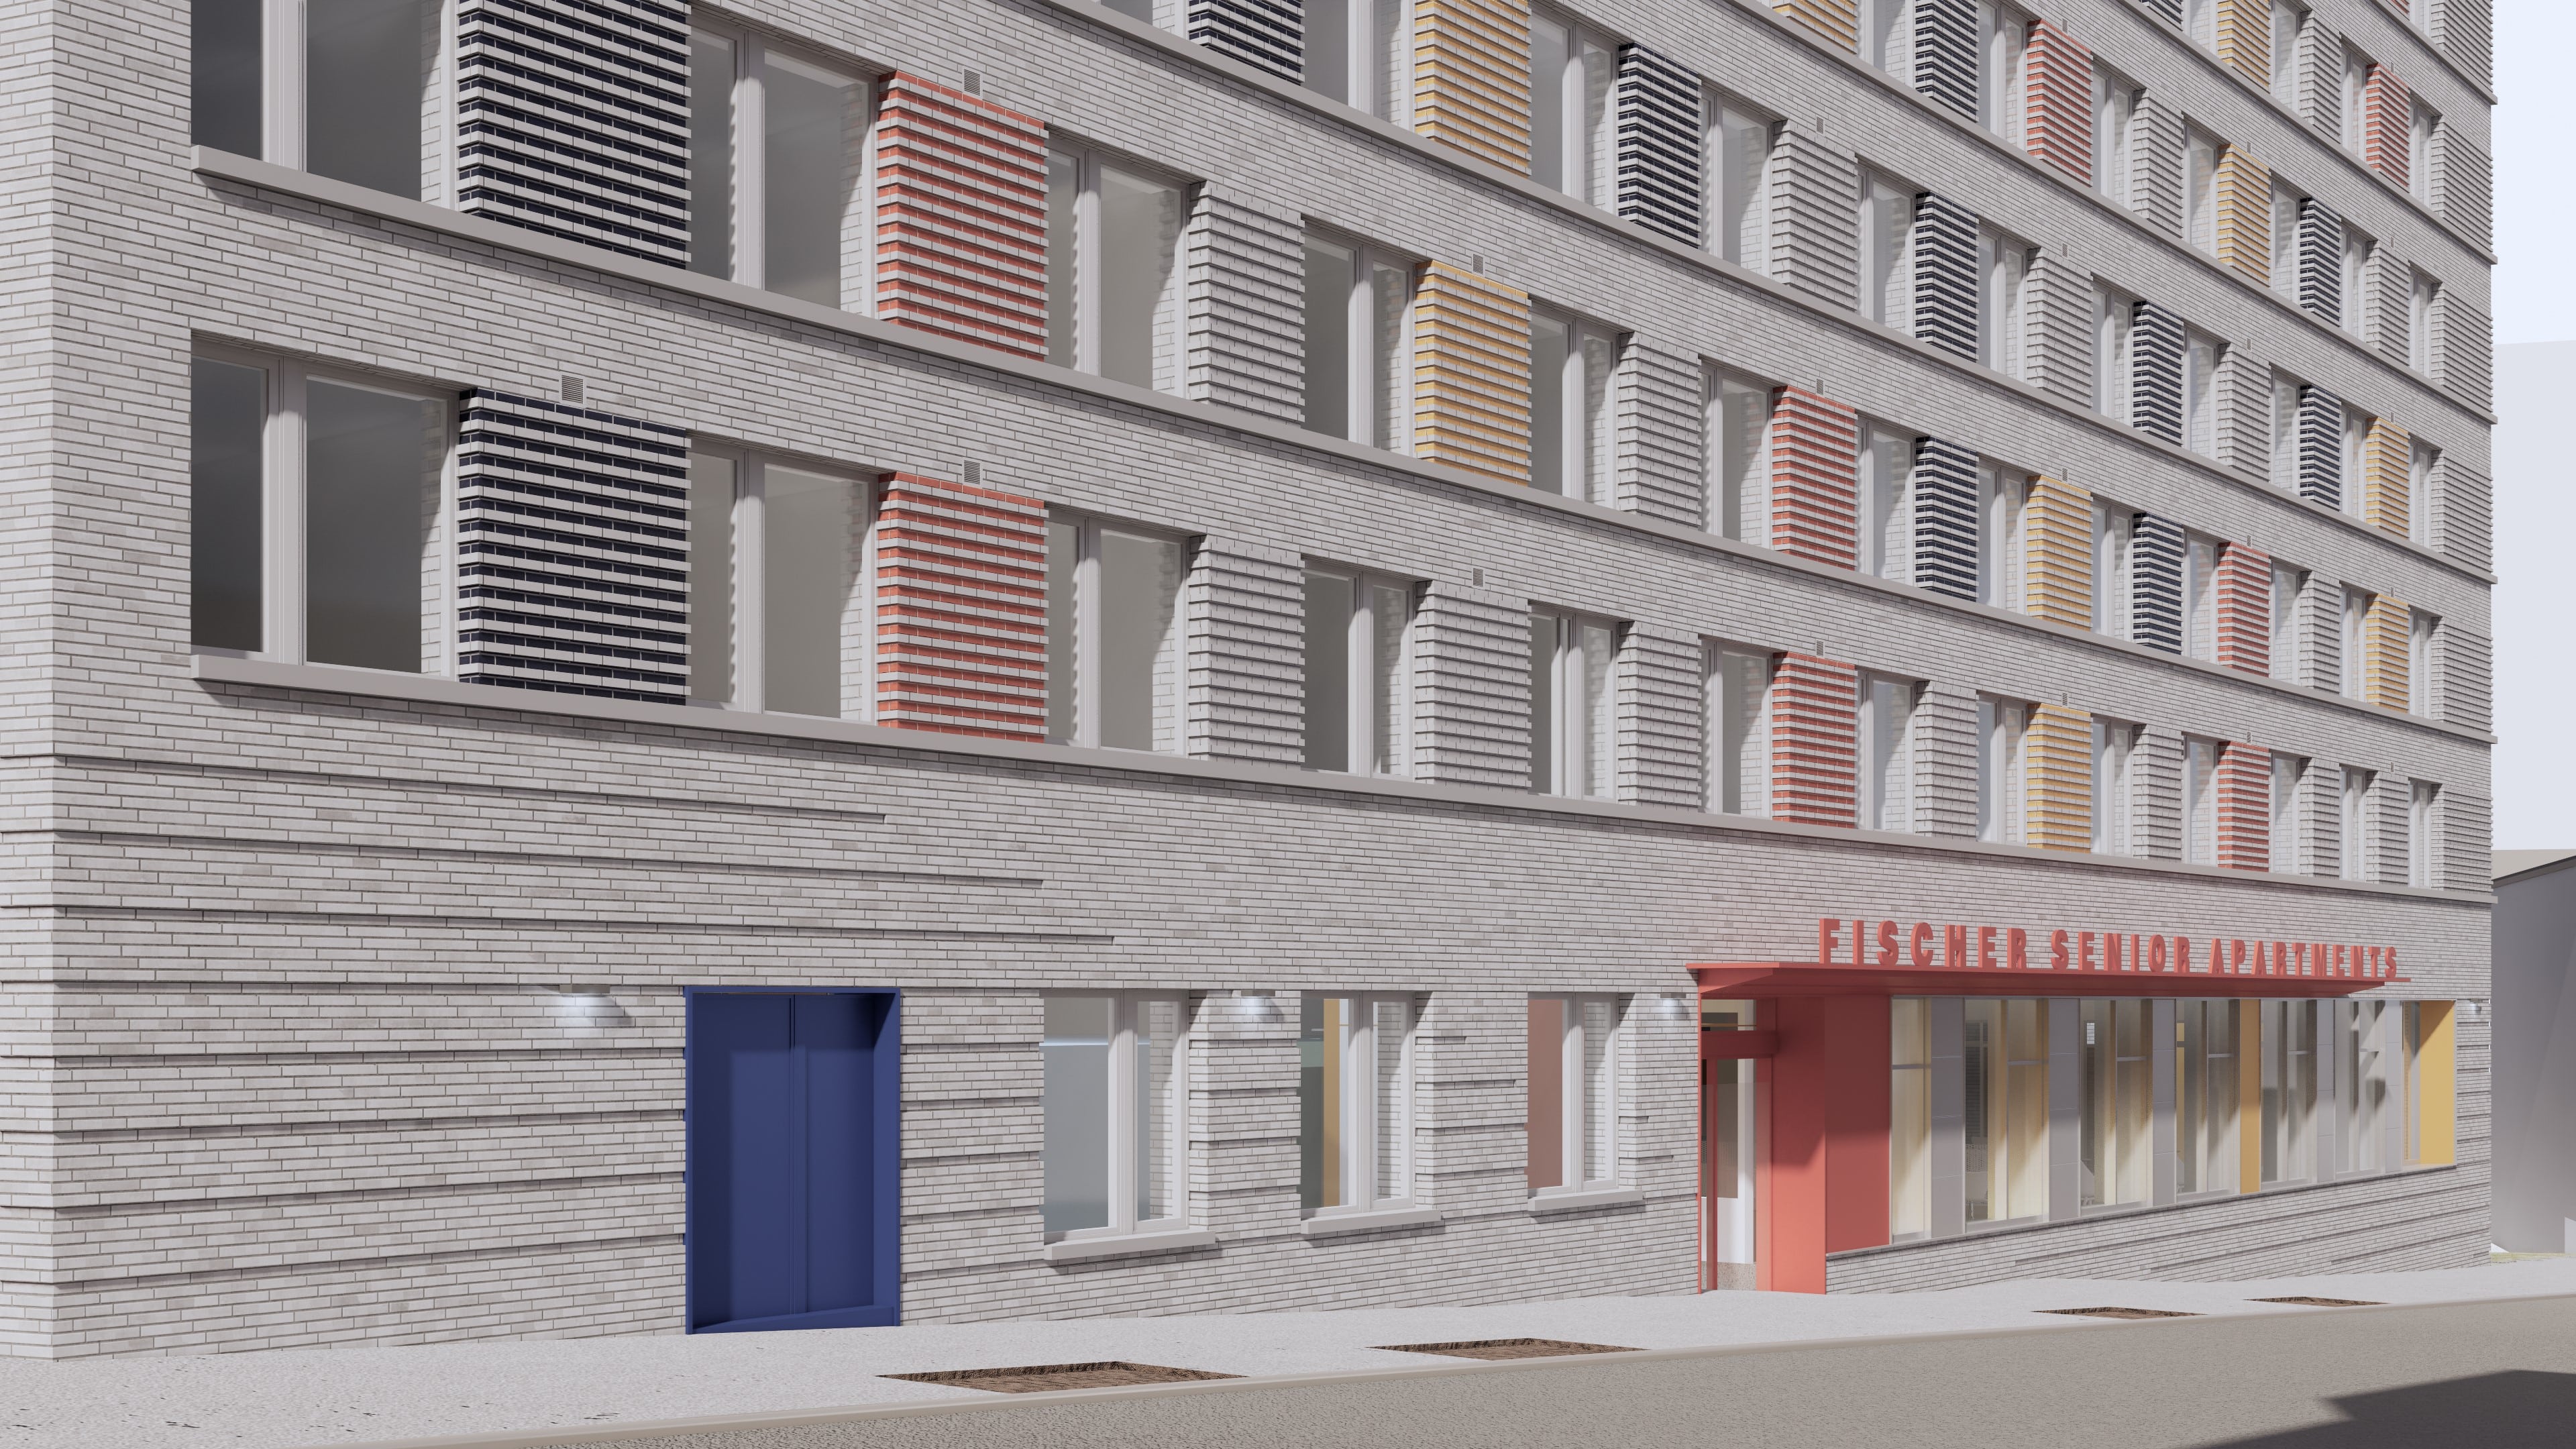 Rendered view of front facade of Fischer Senior Apartments